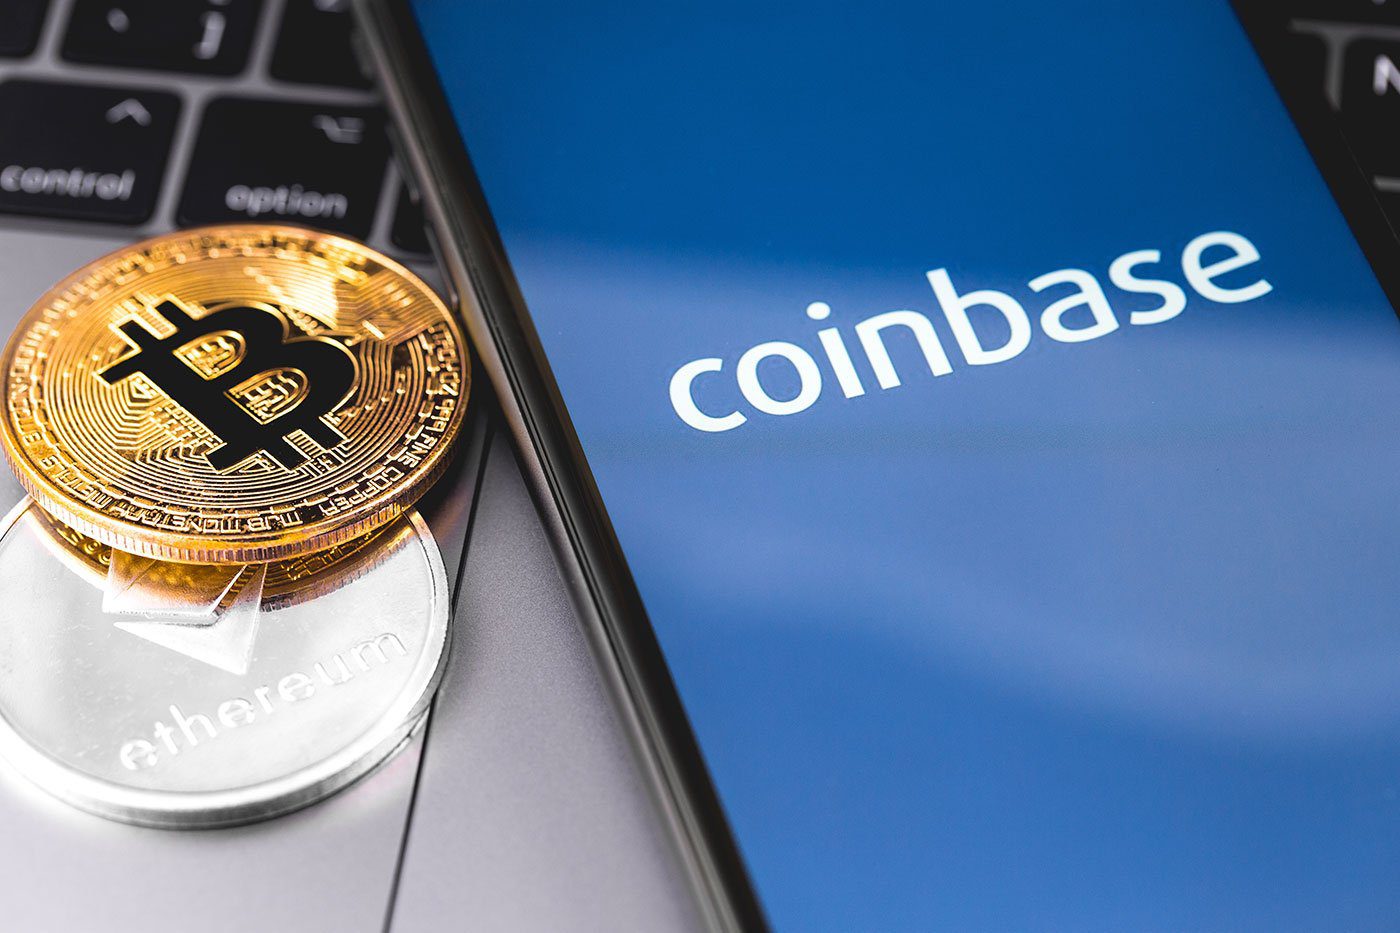 Coinbase releases new asset listings in an increased transparency push